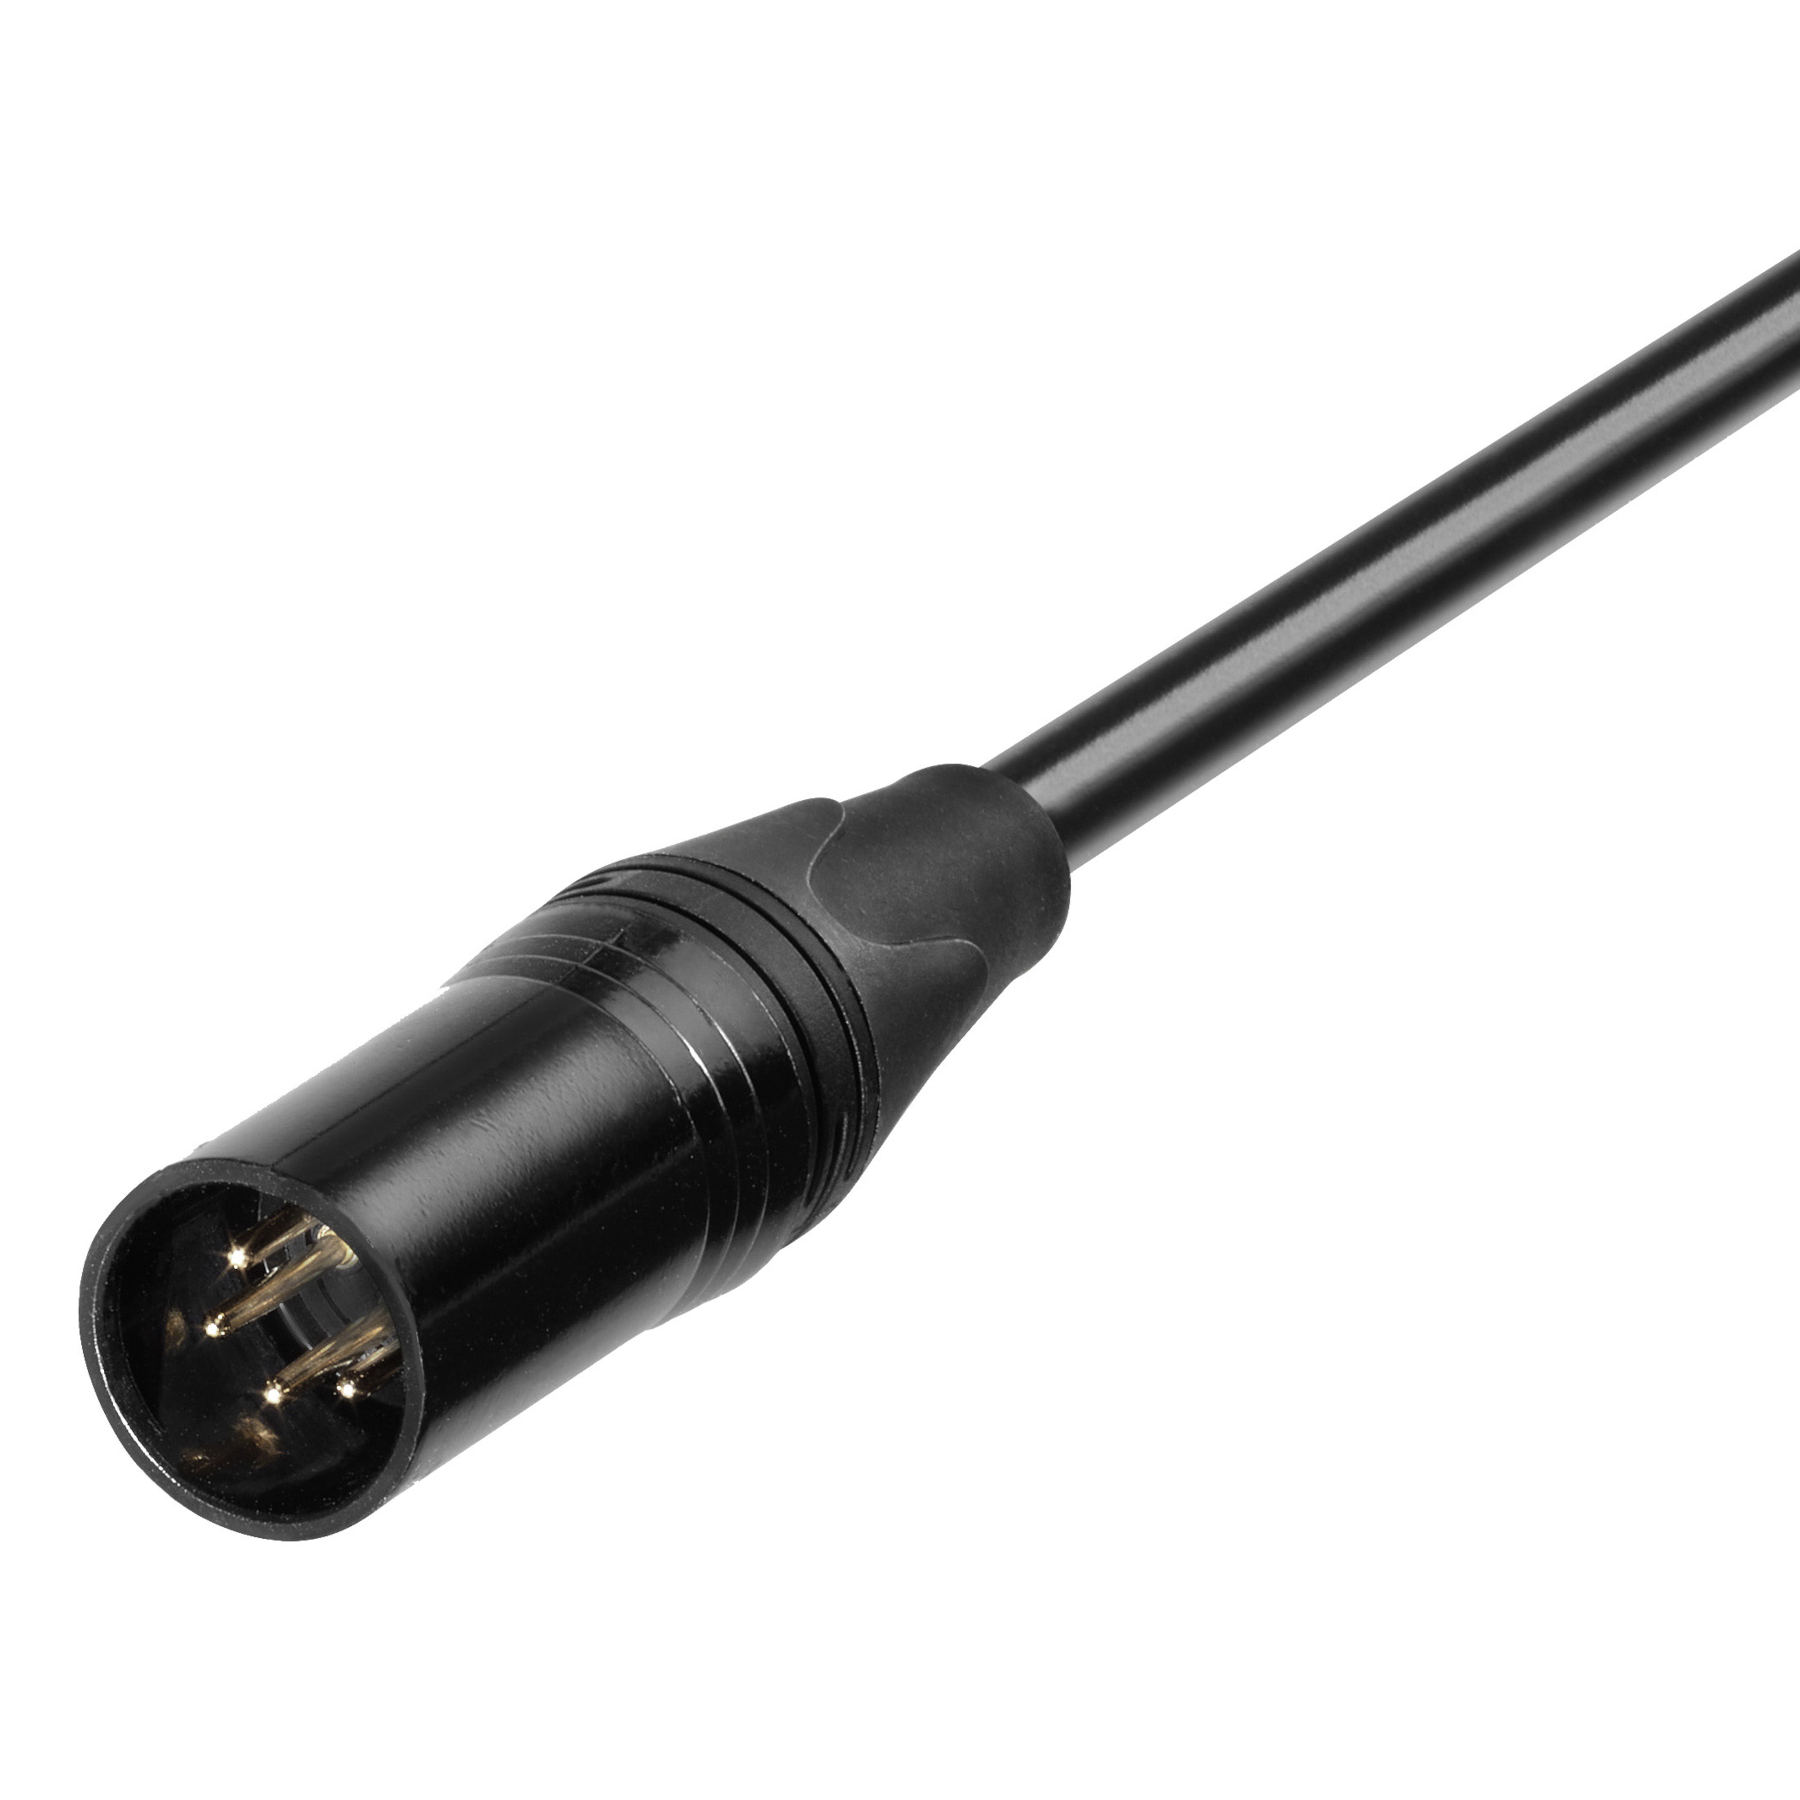 Productfoto van ONgineer Secondary Cable for LiON Smart Charger - XLR 4-Pin (BMZ)